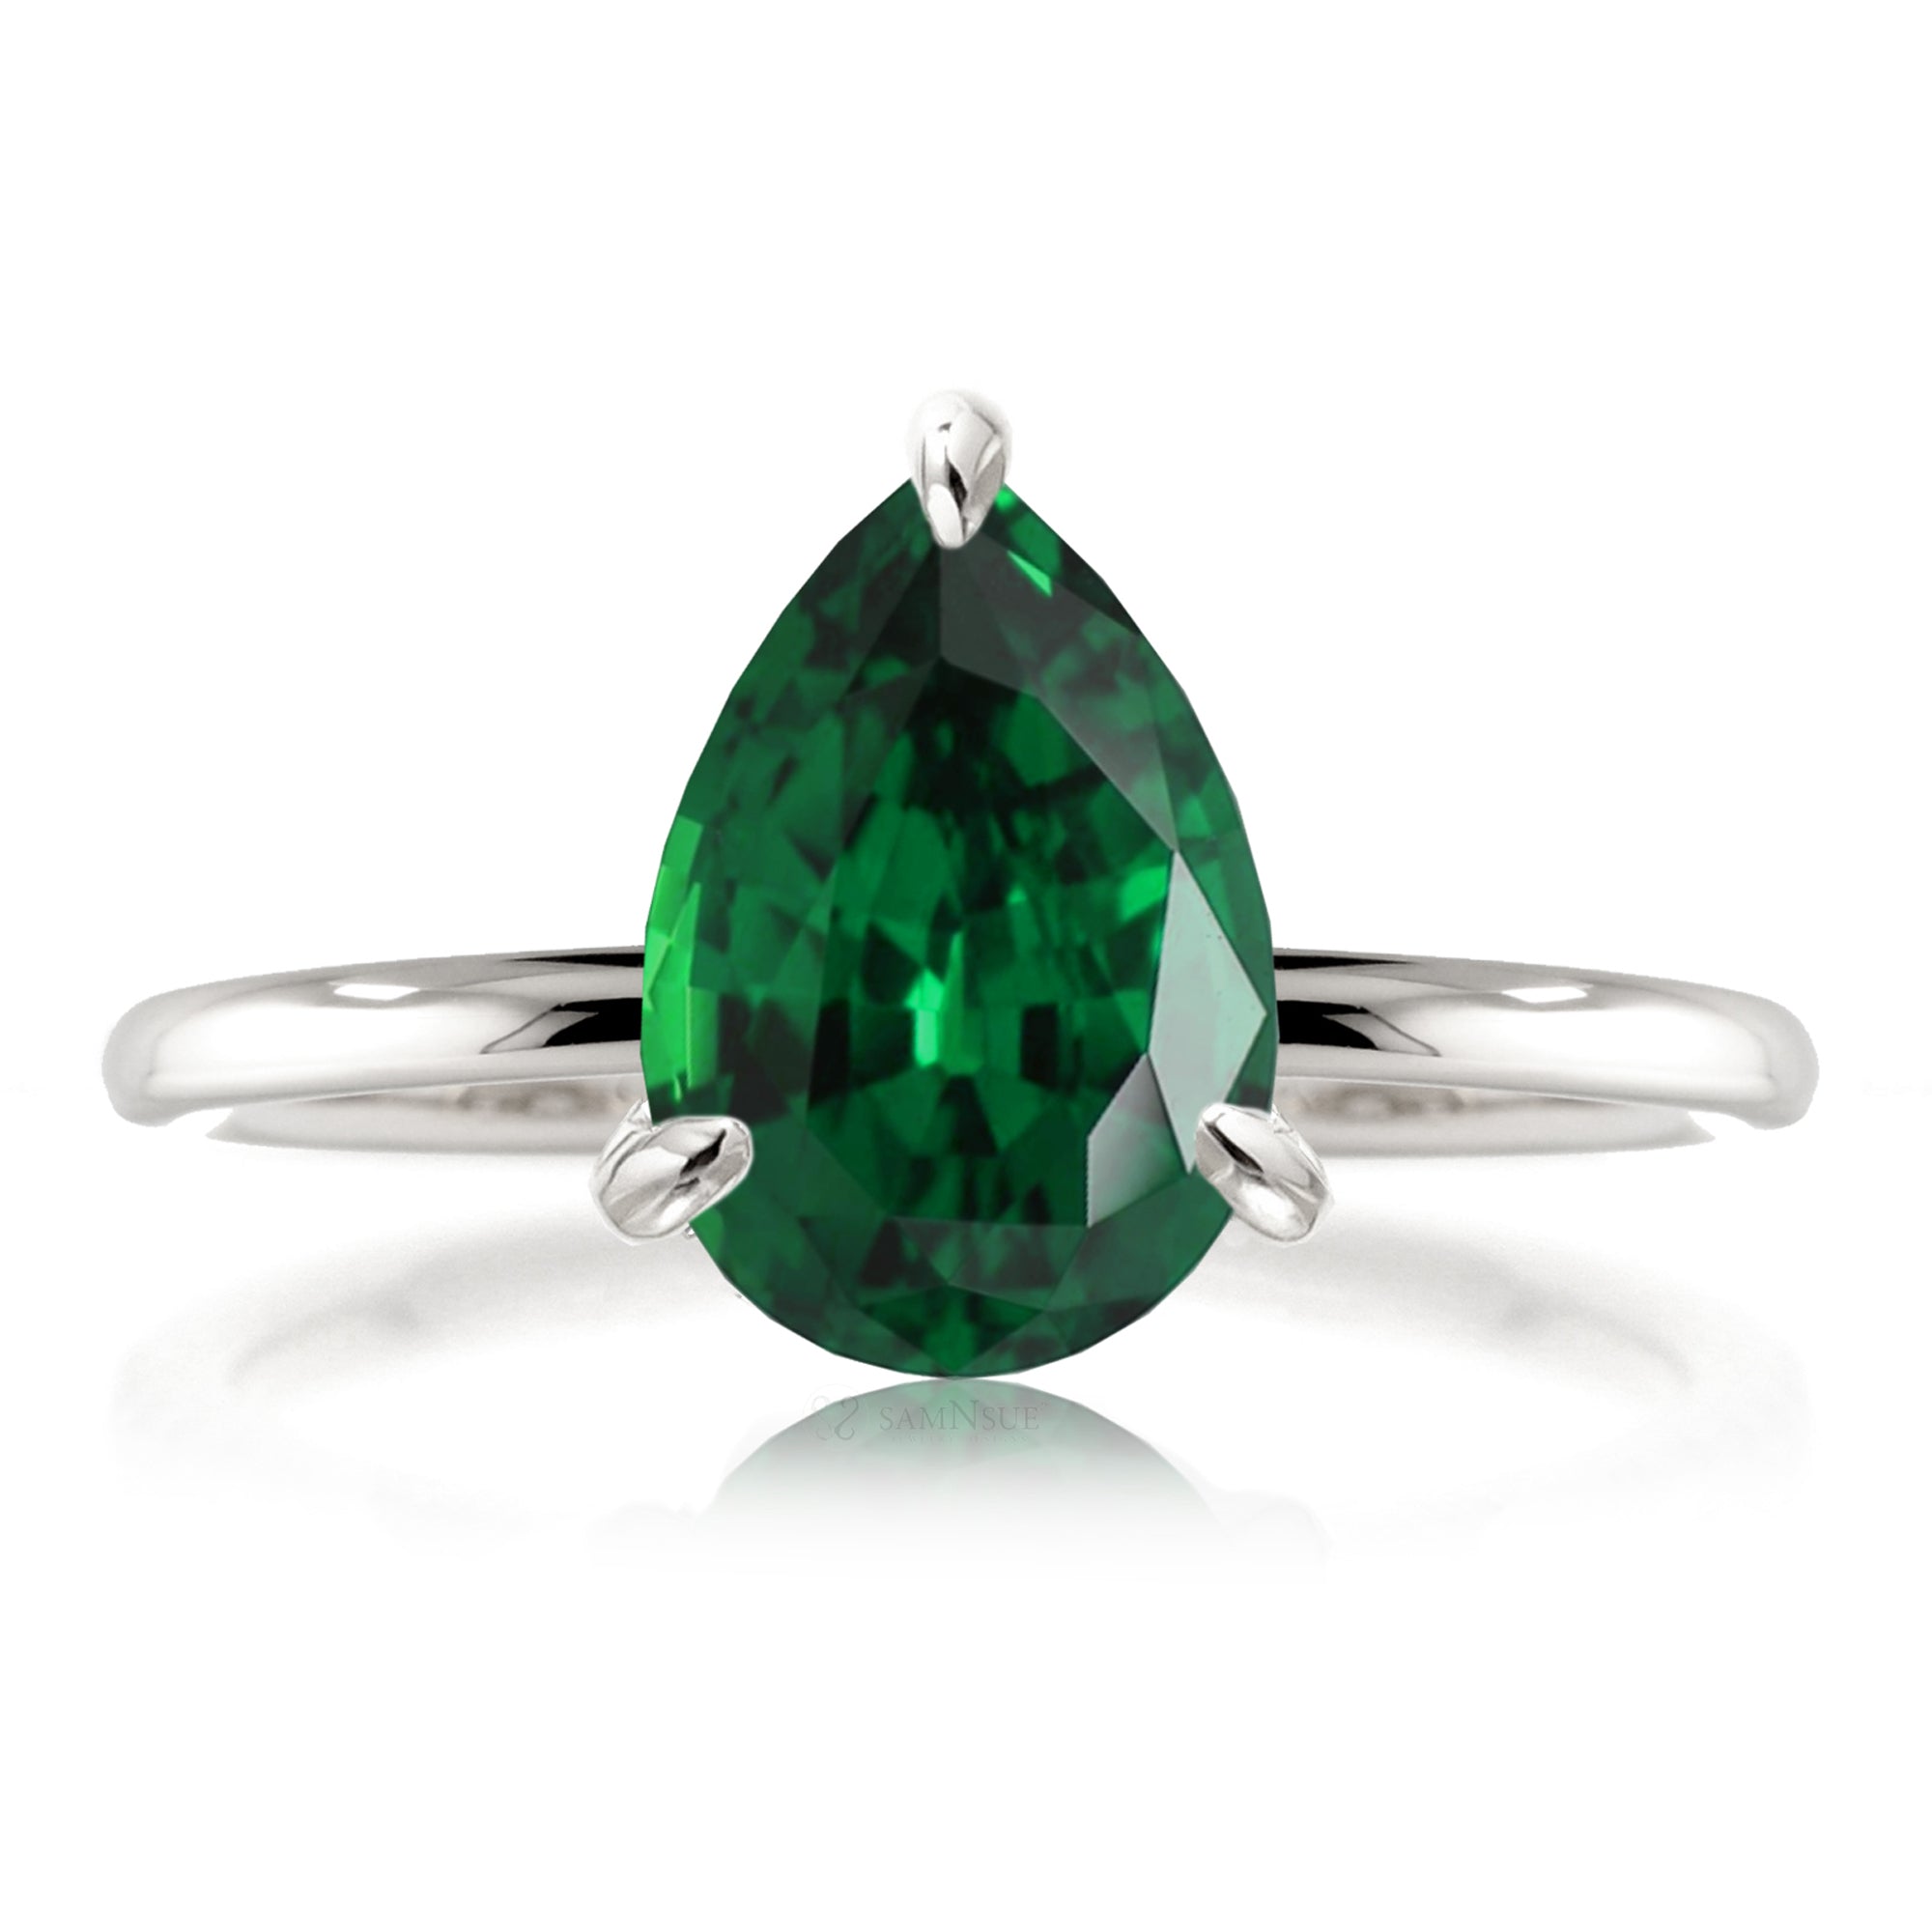 Pear green emerald solid band engagement ring white gold - the Ava